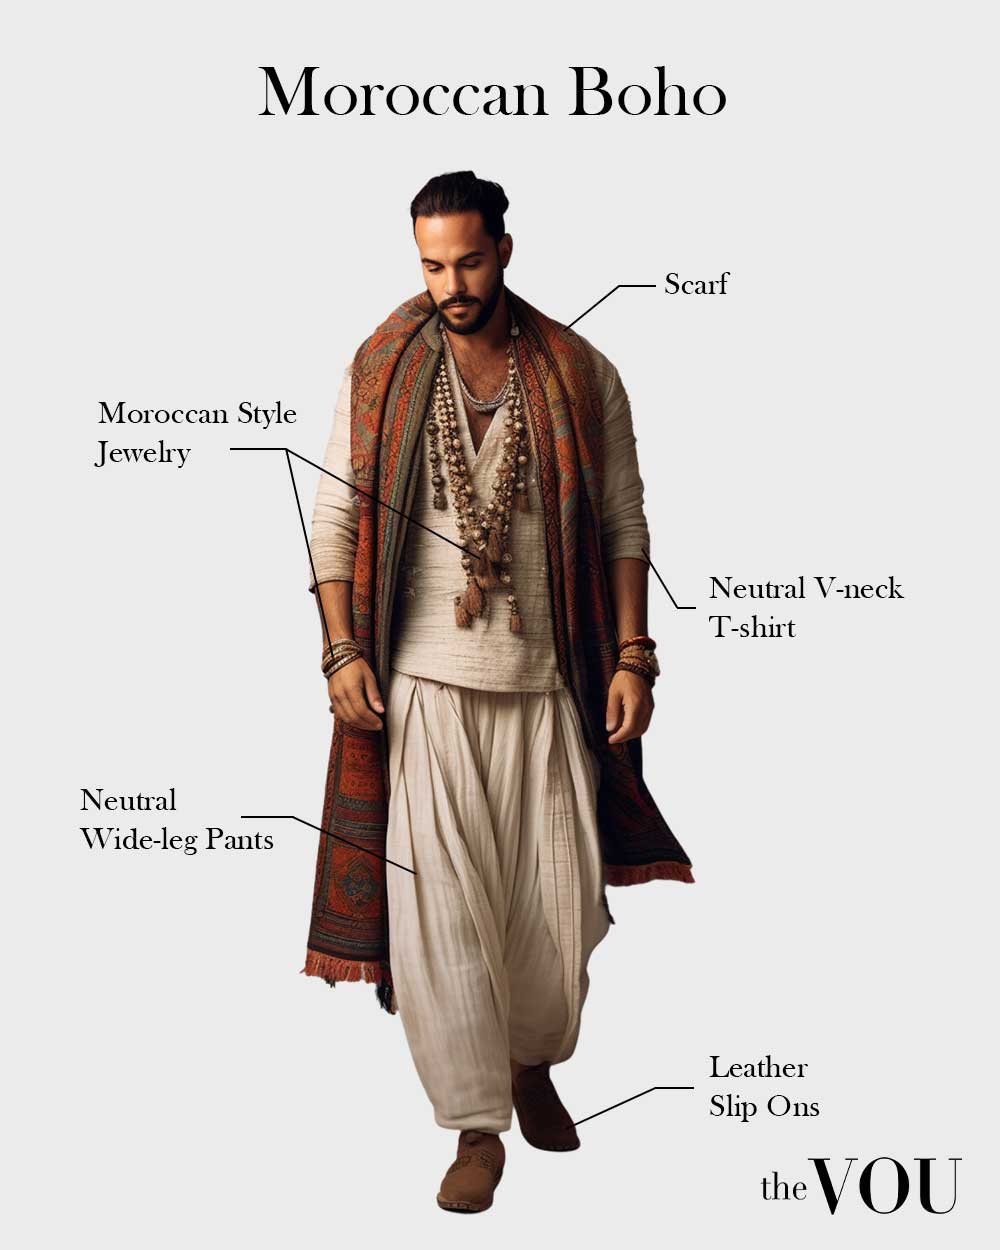 Moroccan boho outfit for men